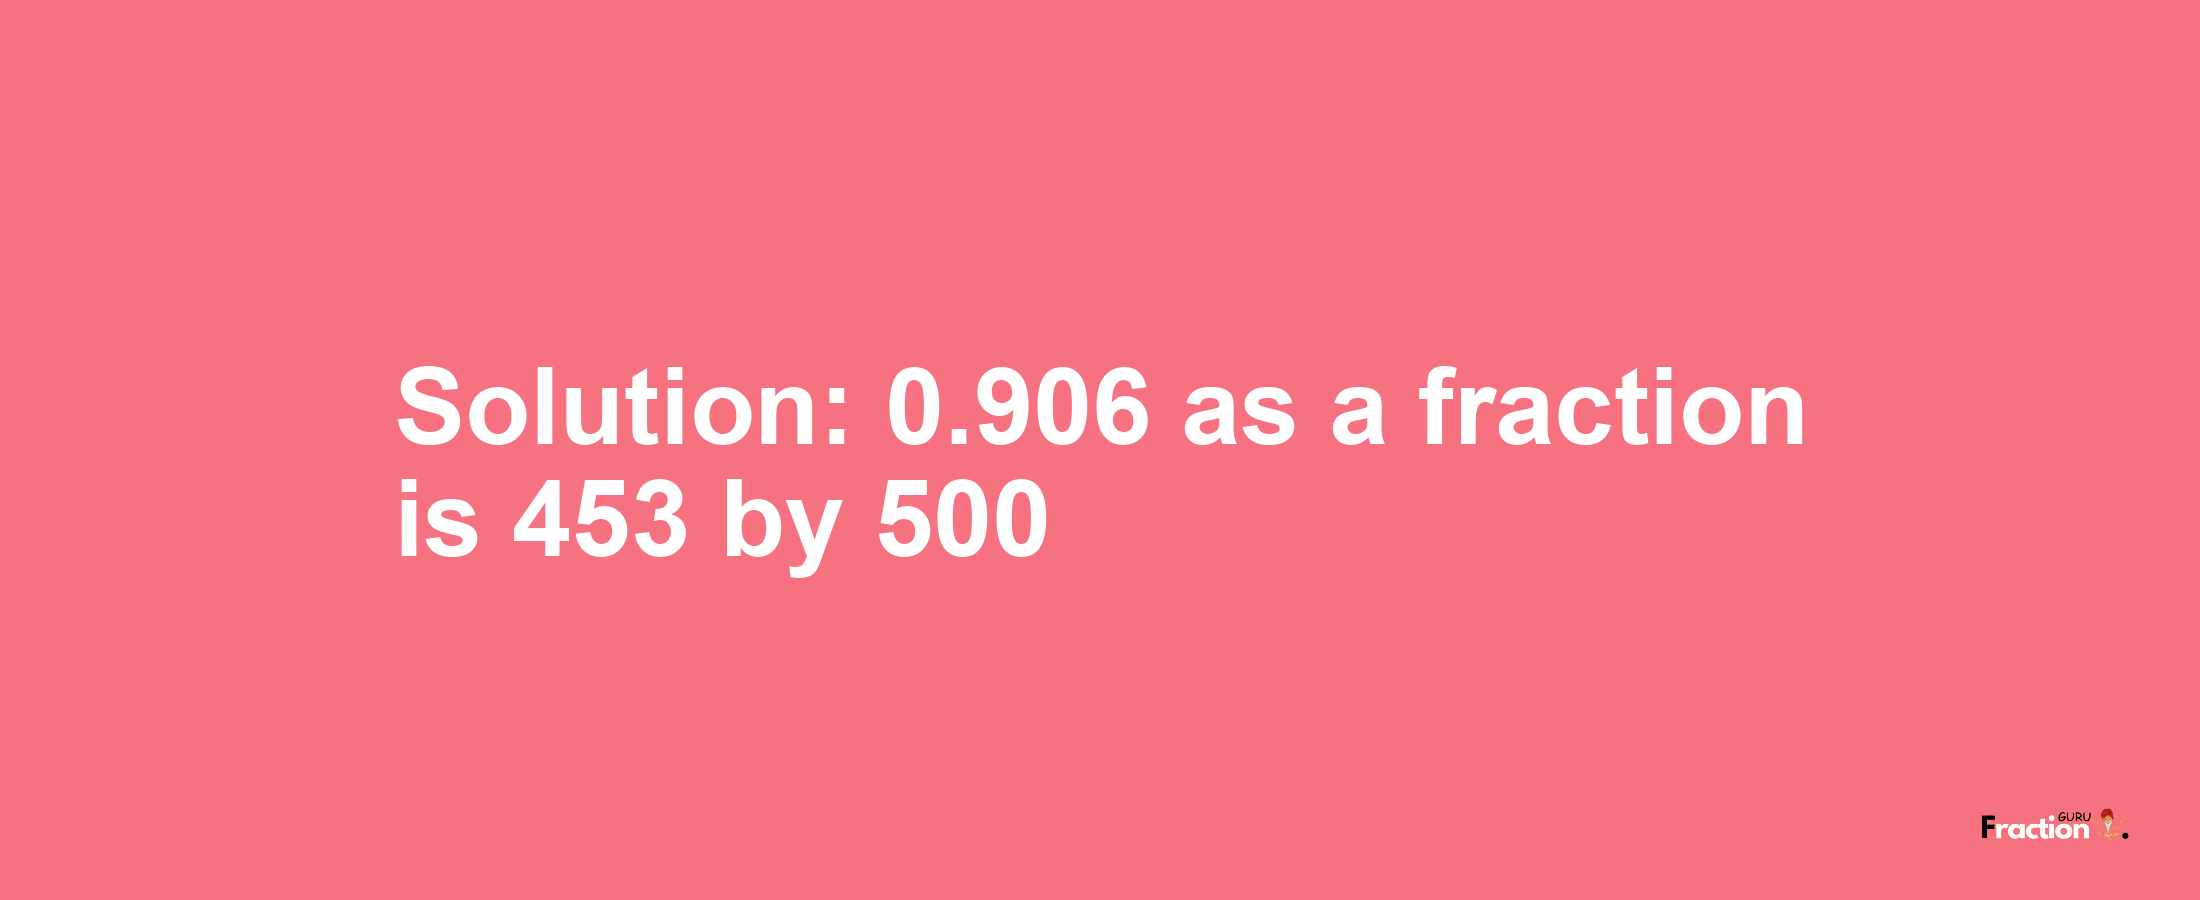 Solution:0.906 as a fraction is 453/500